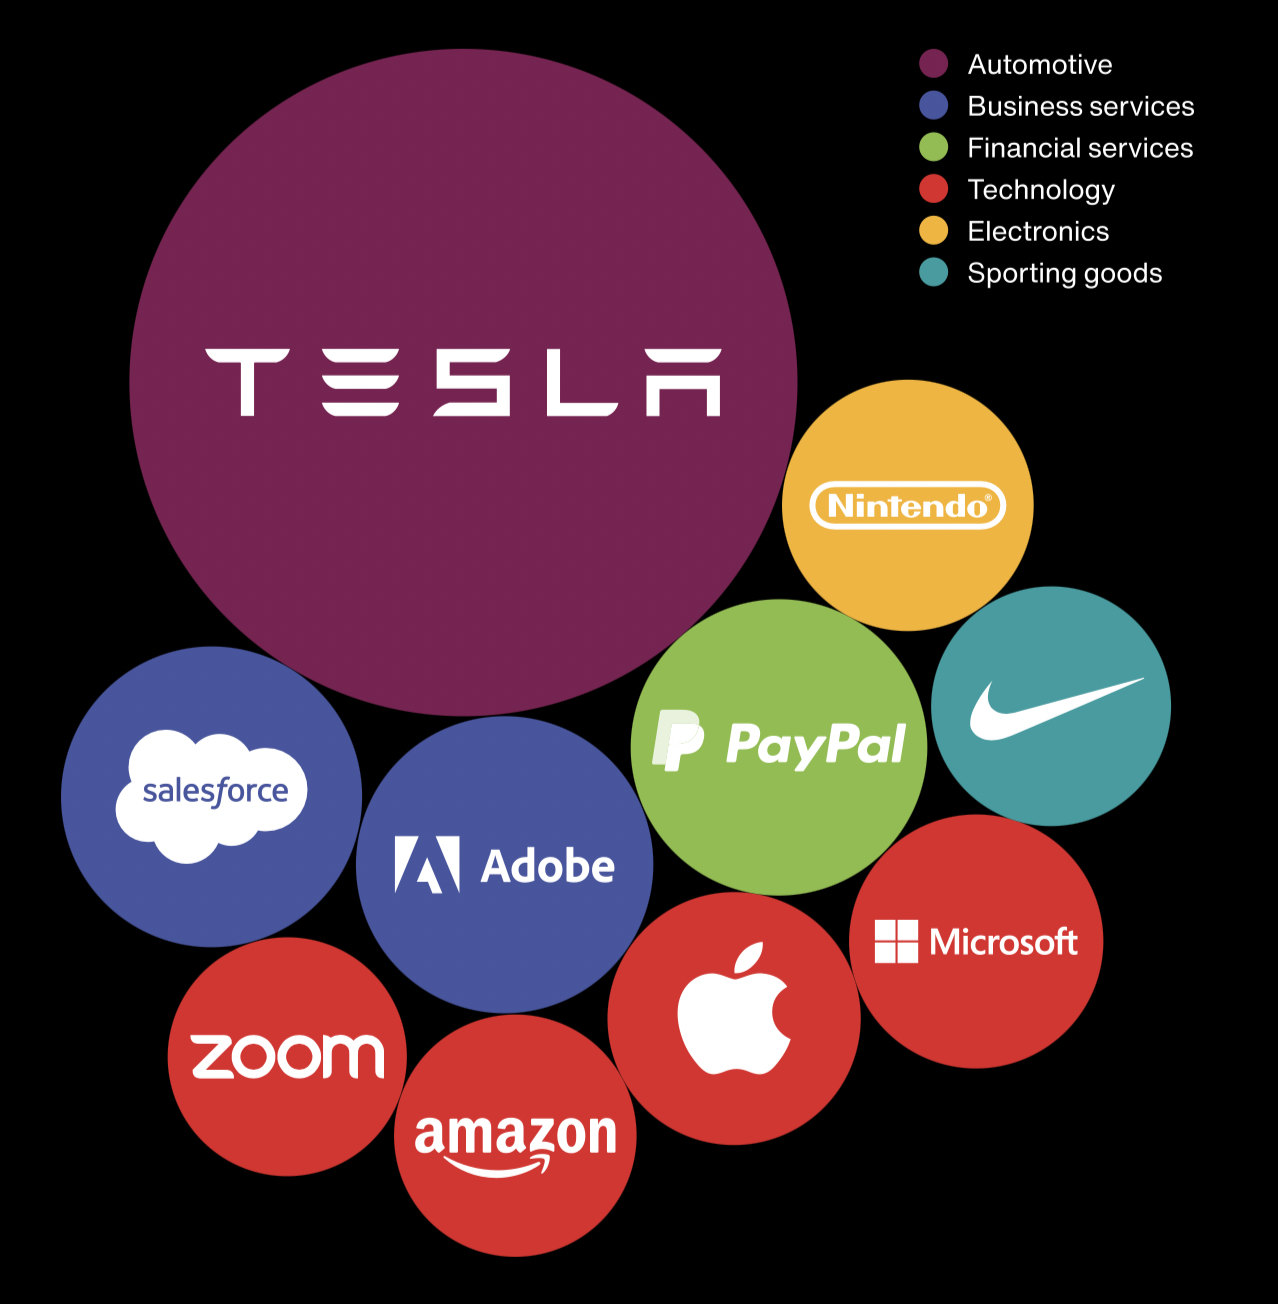 Best Global Brands 2021: Tech firms increase dominance as major